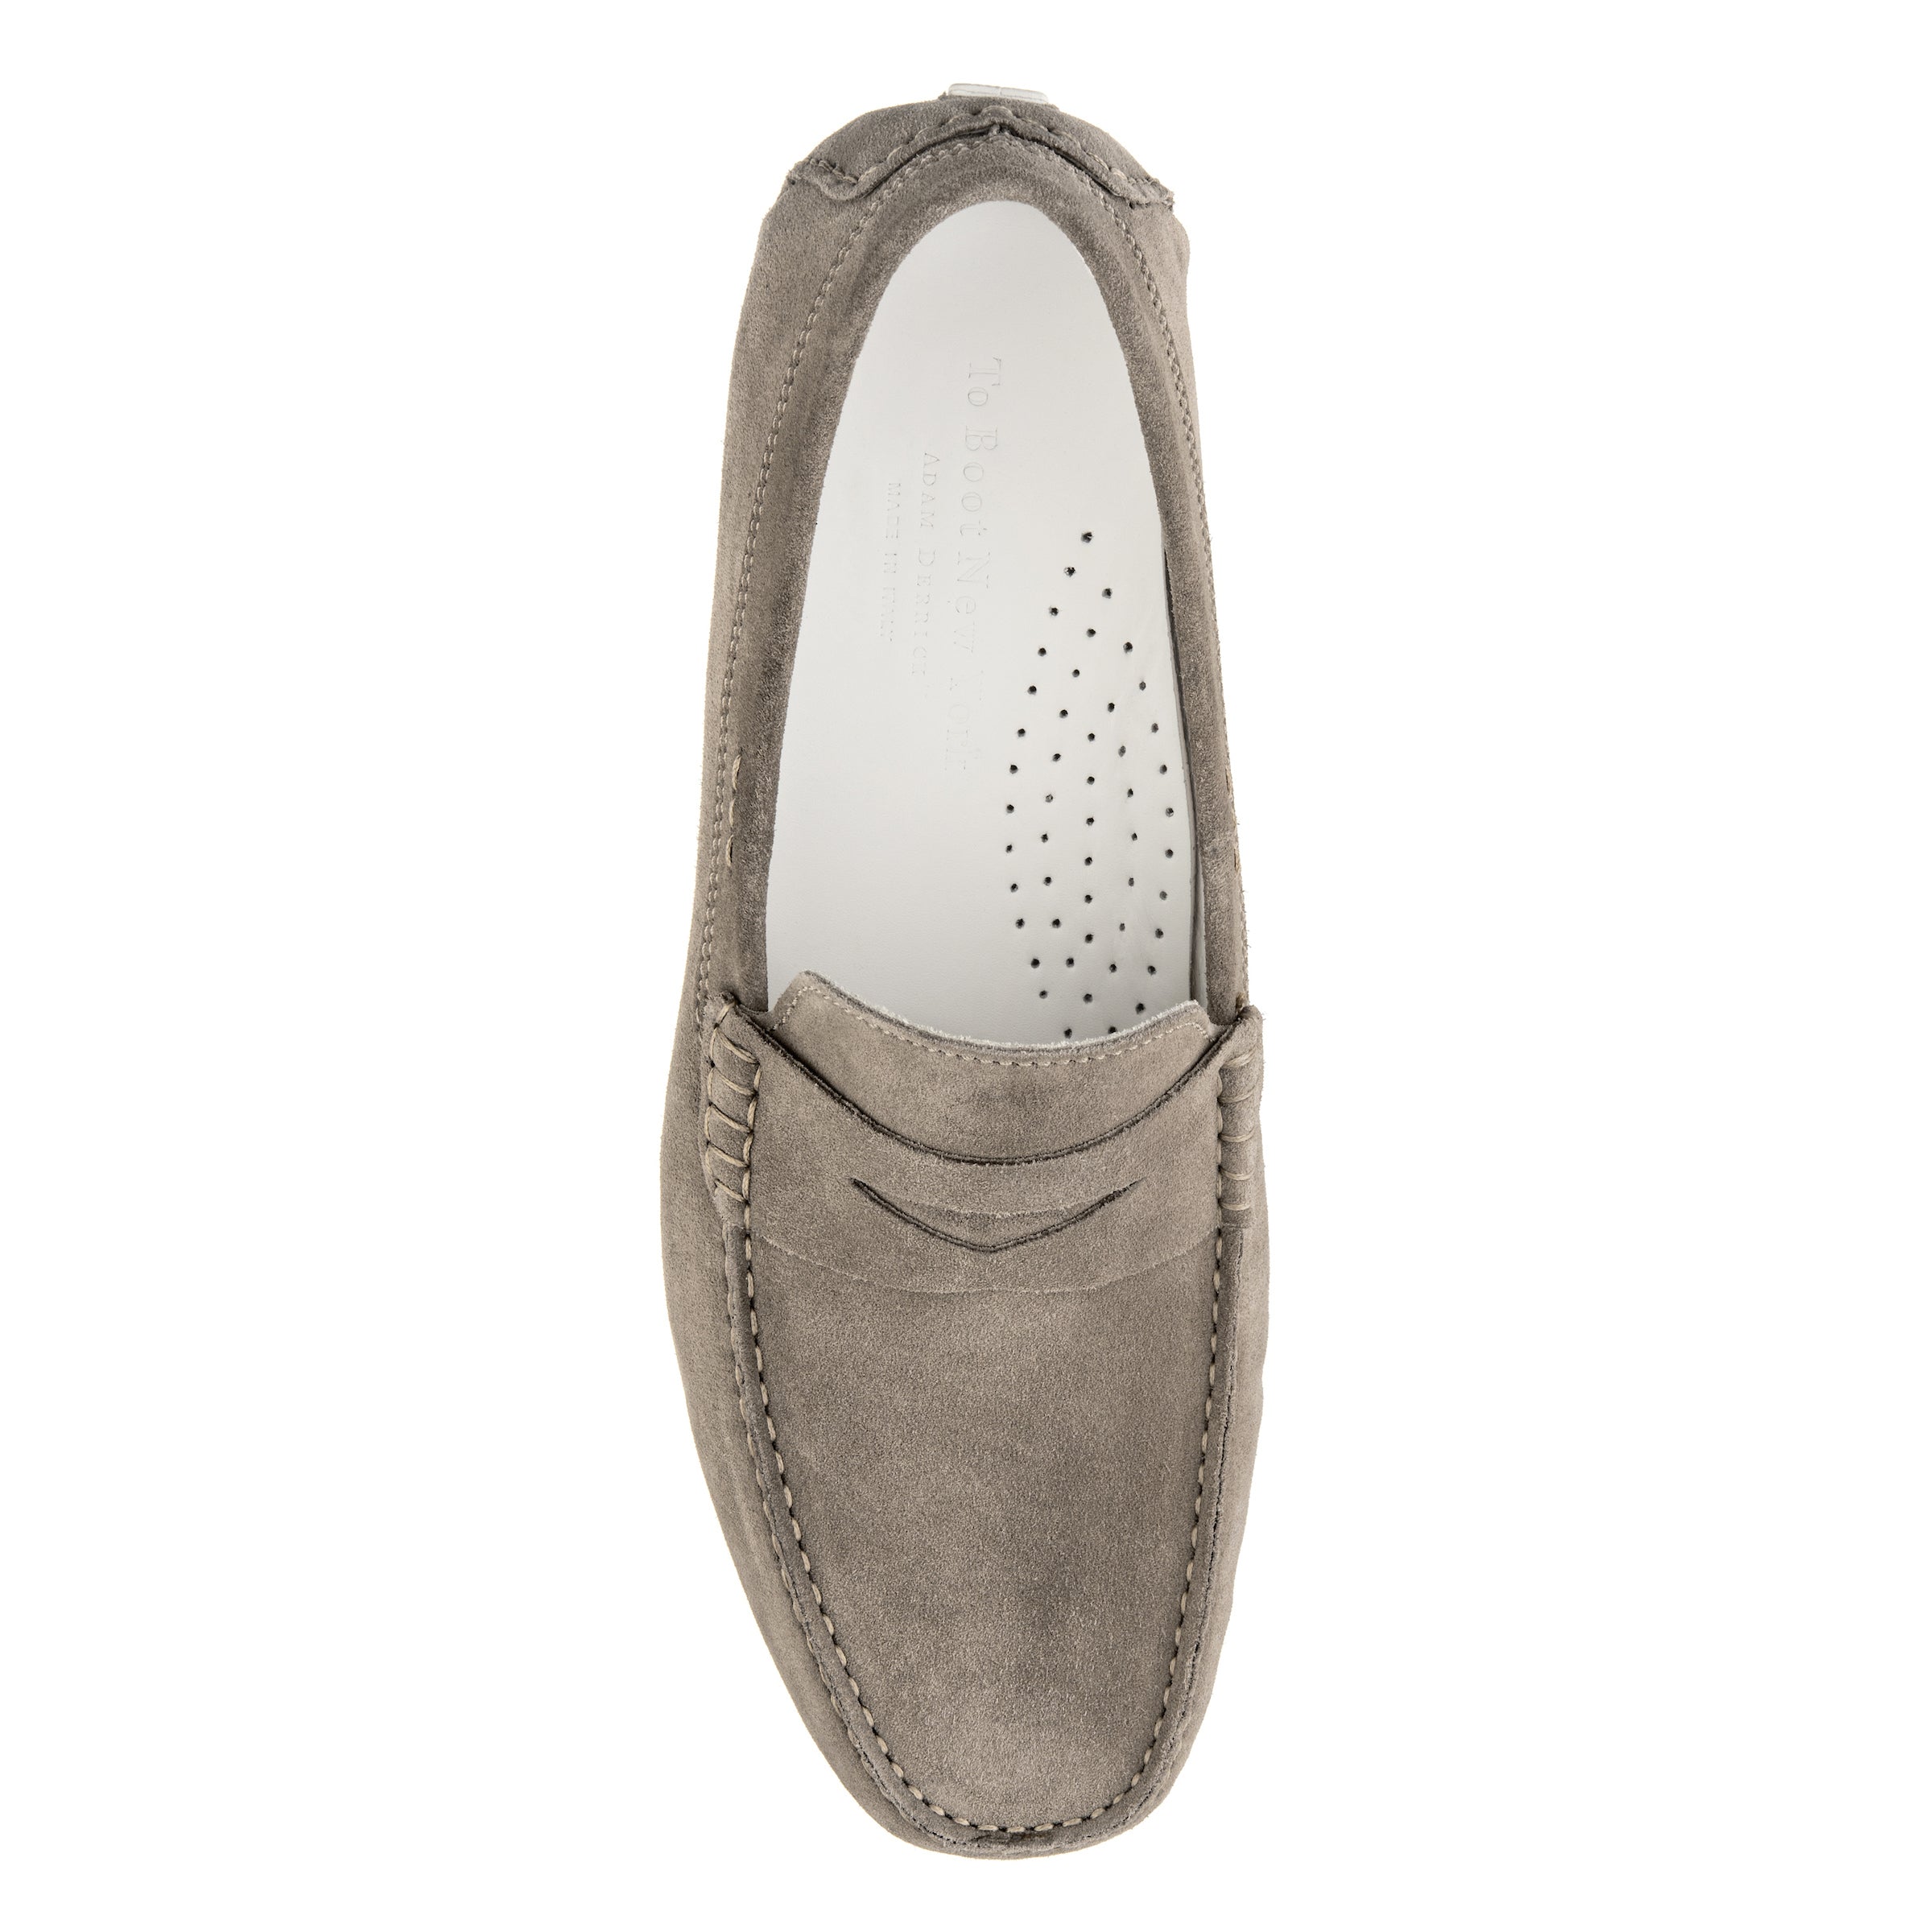 Idris Taupe Suede Driving Shoe